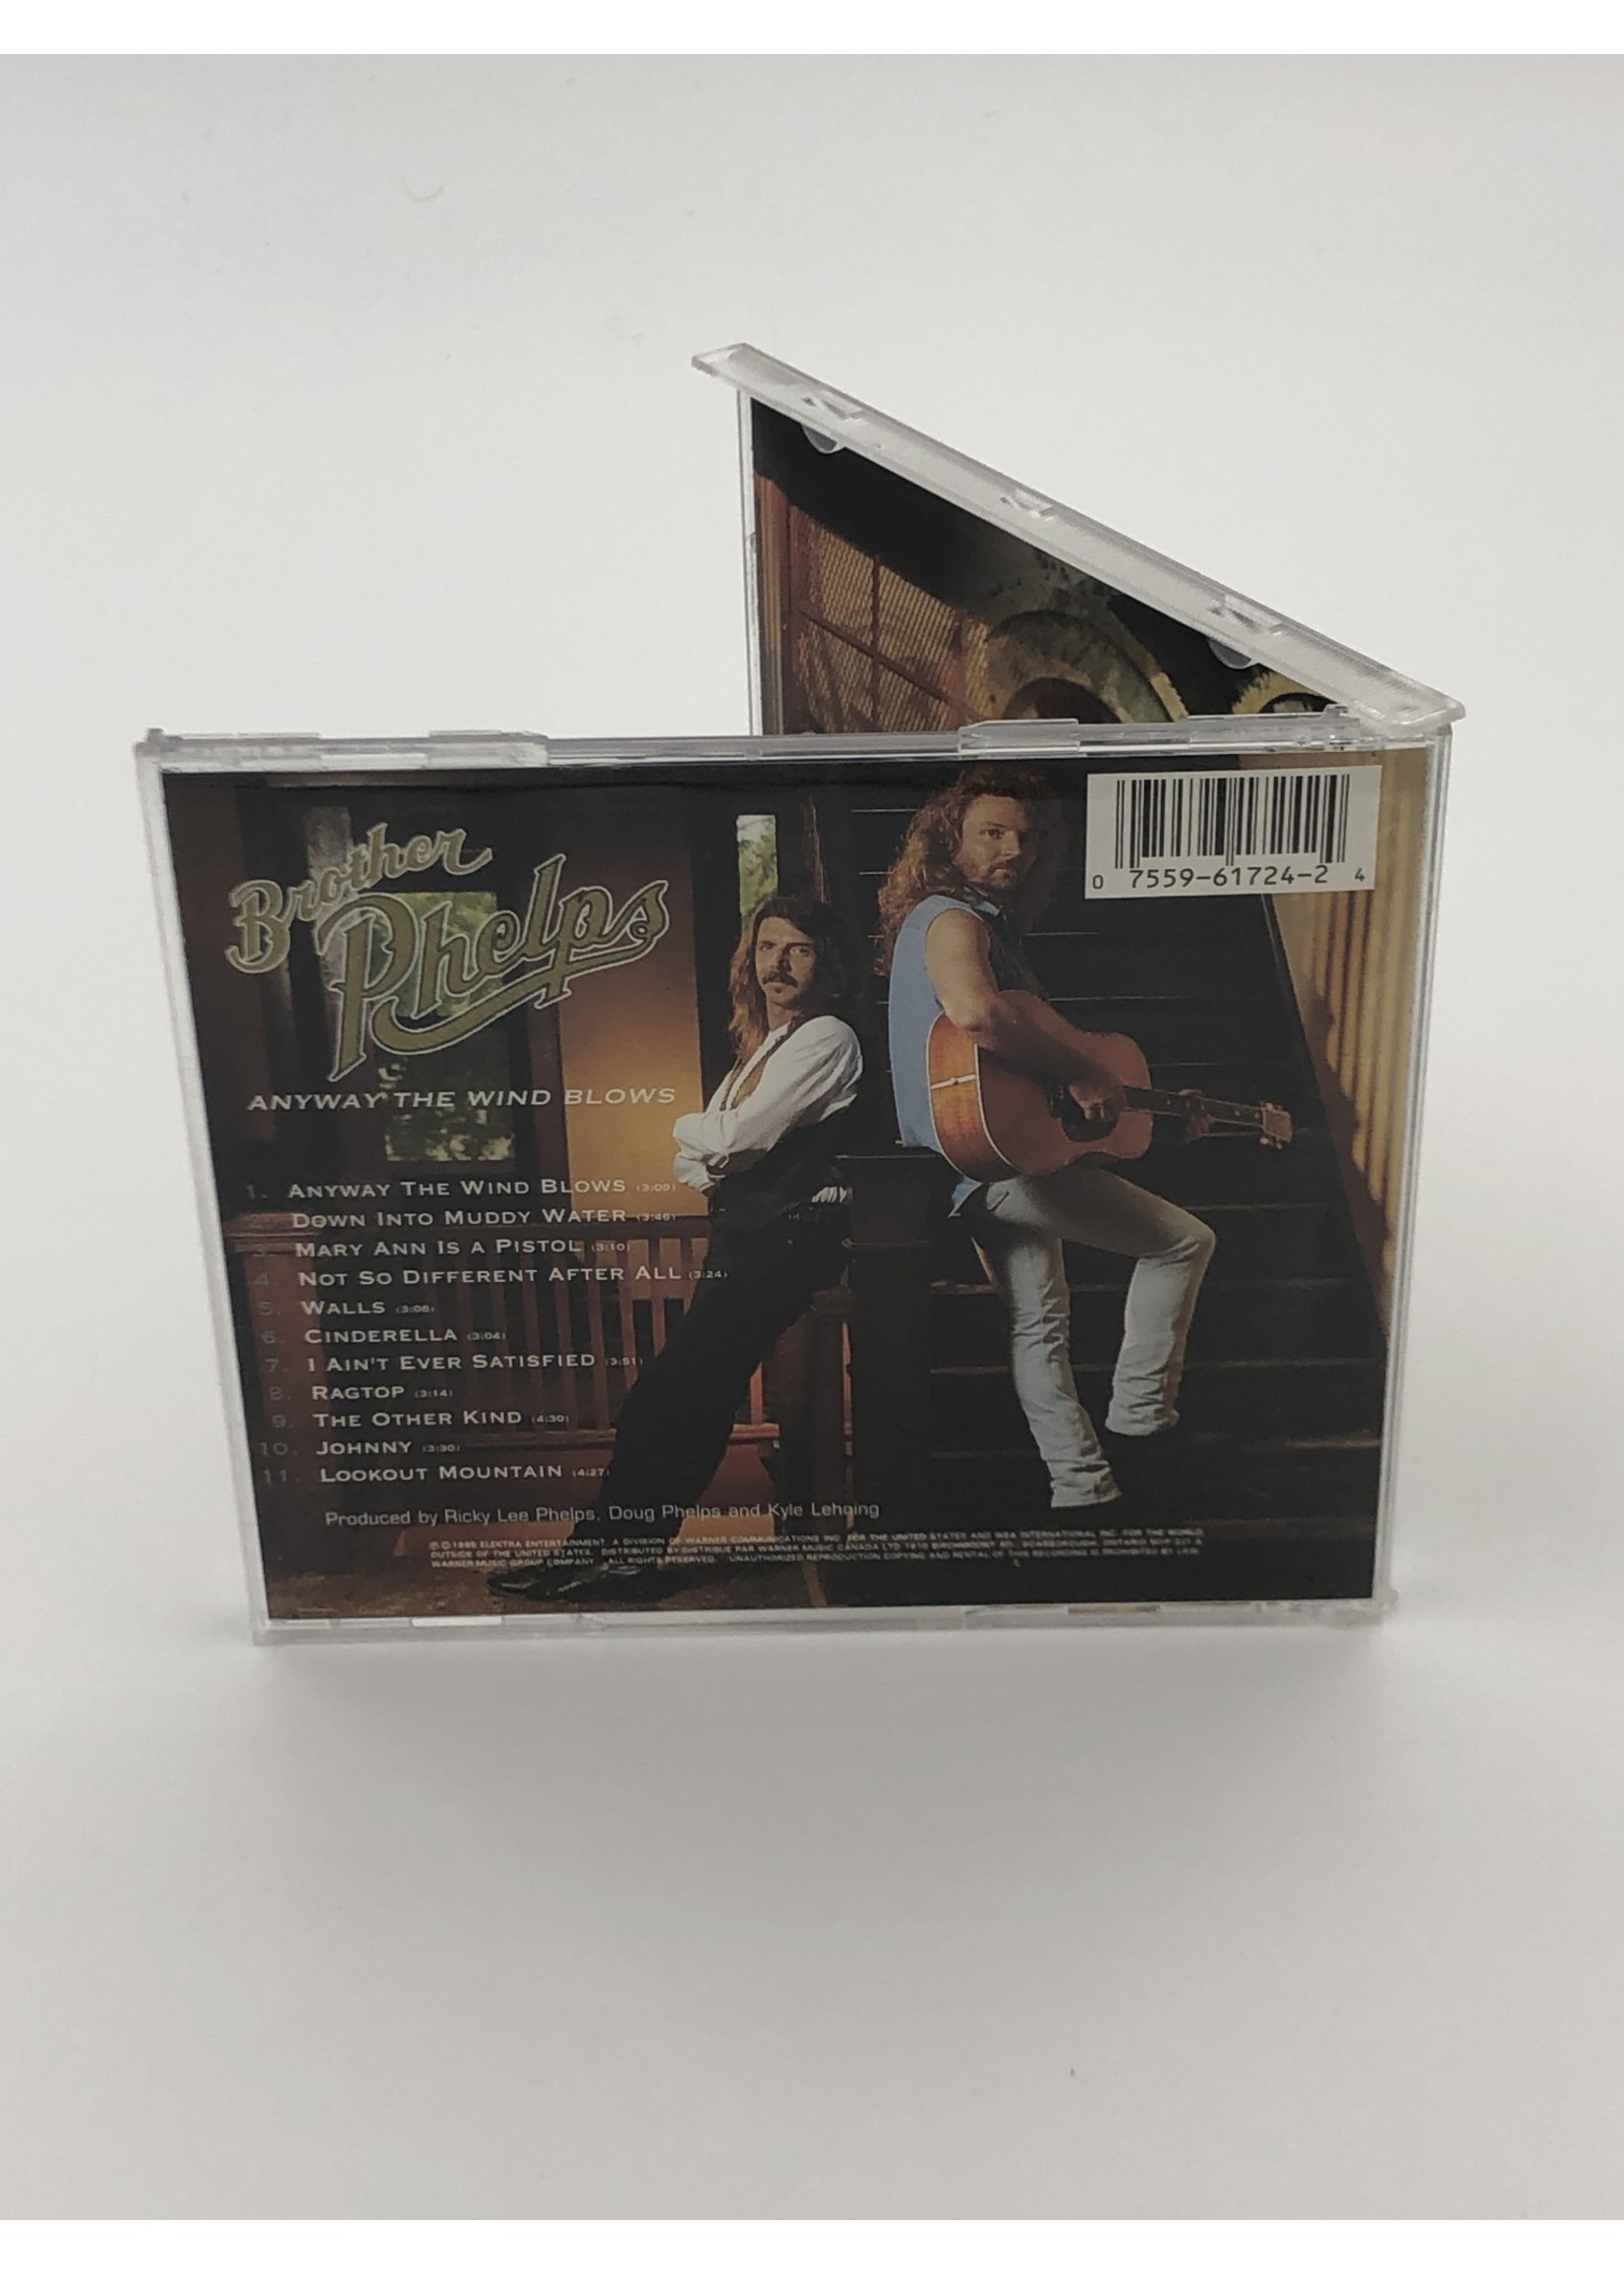 CD Brother Phelps: Anyway the Wind Blows CD